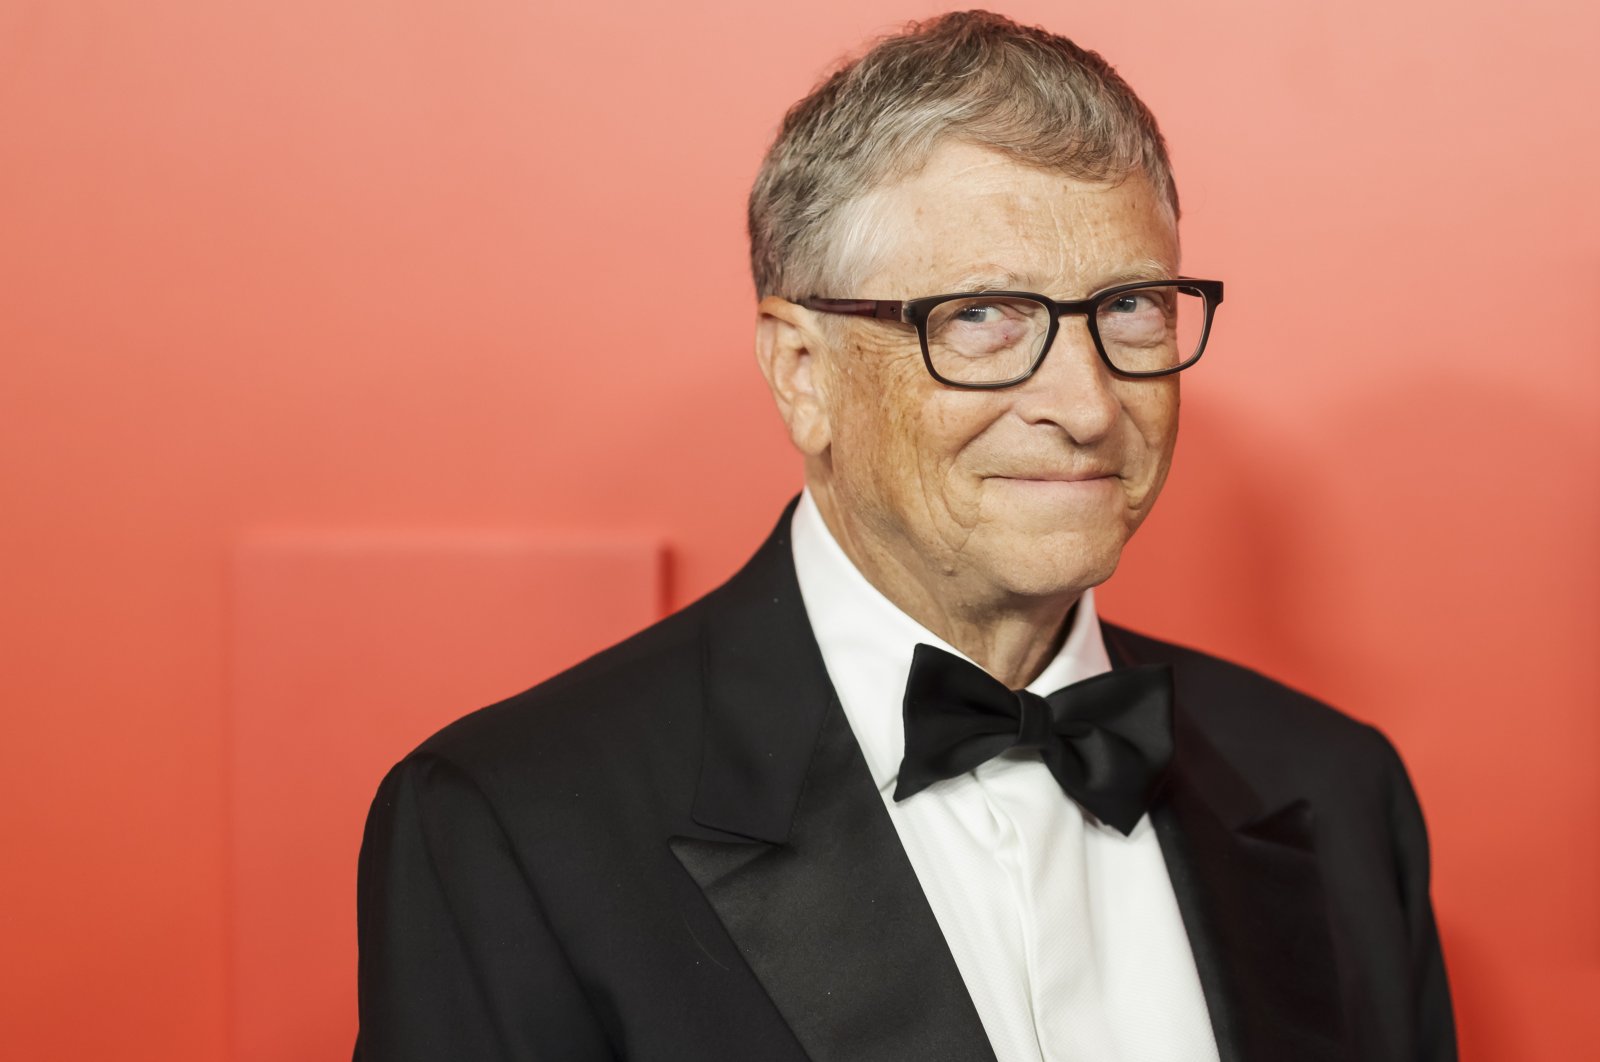 Microsoft founder Bill Gates poses on the red carpet at the Time 100 Gala, New York, U.S., June 8, 2022. (EPA Photo)